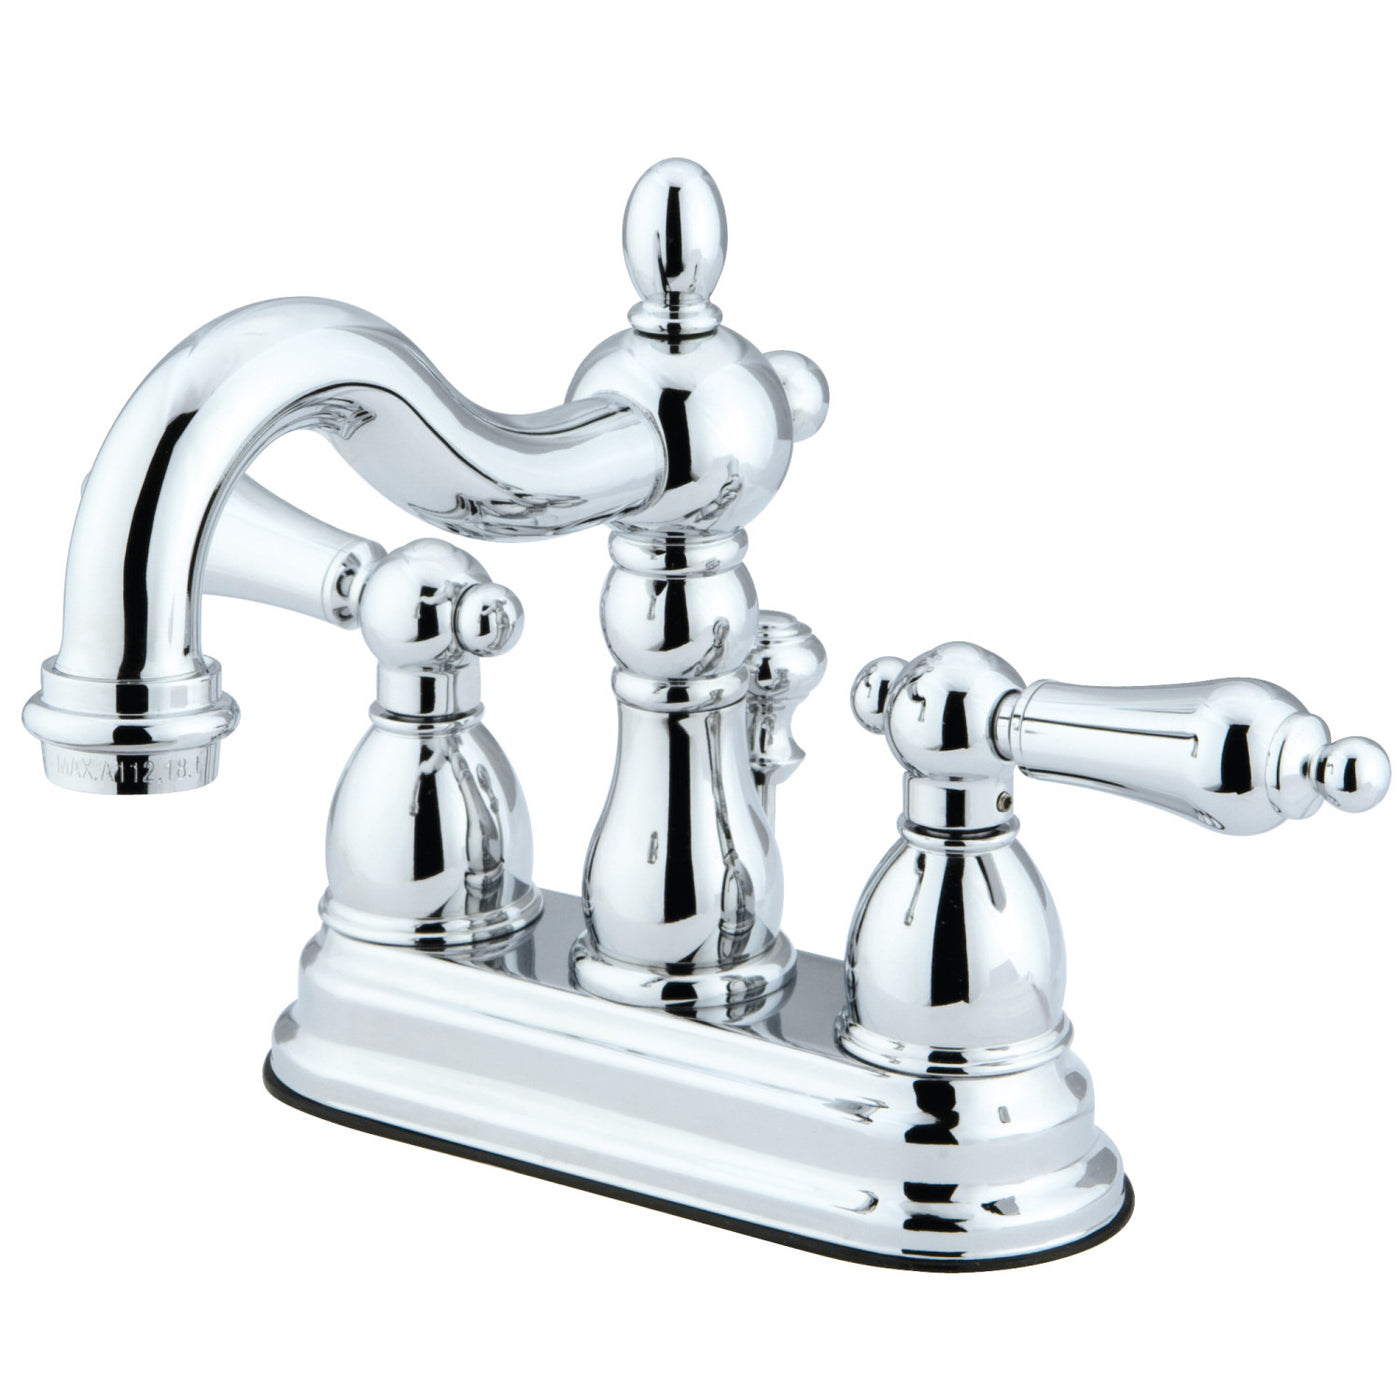 Elements of Design EB1601AL 4-Inch Centerset Bathroom Faucet with Plastic Pop-Up, Polished Chrome